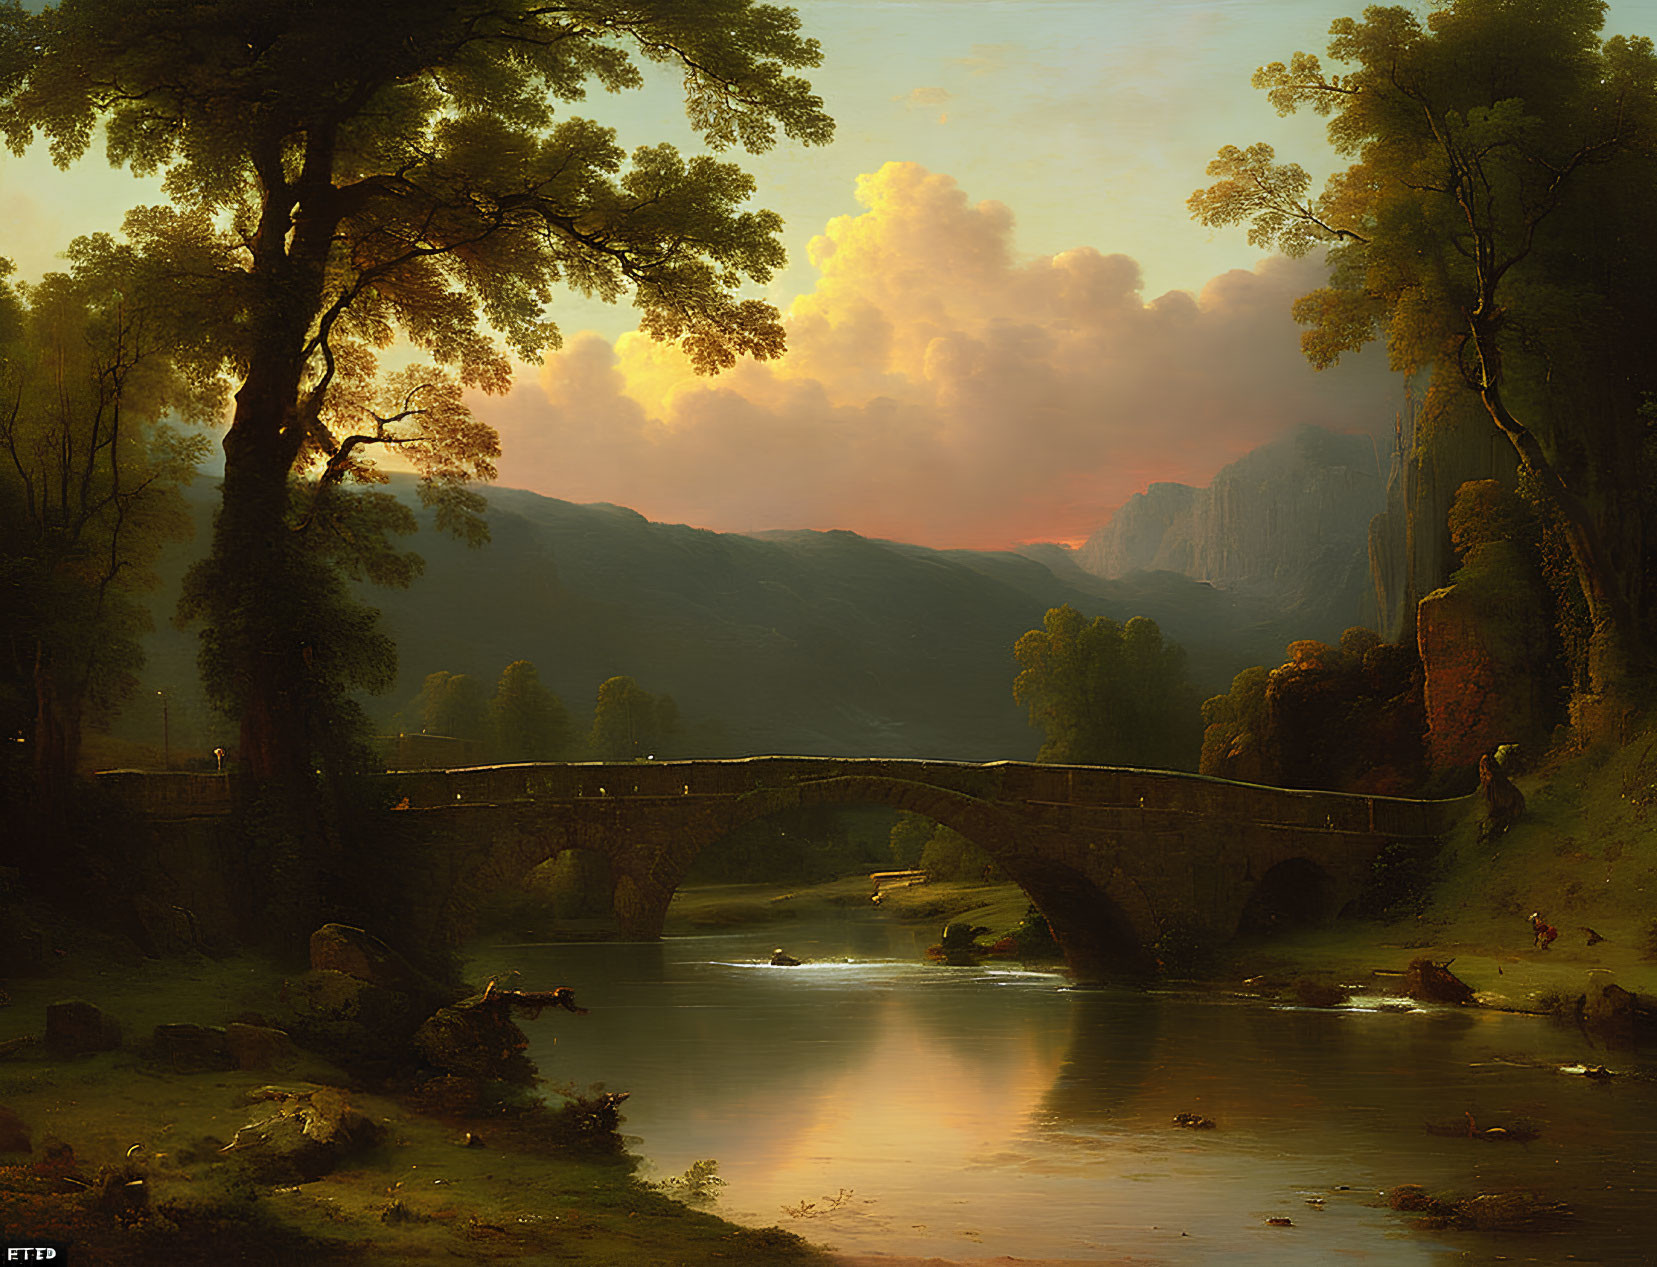 Tranquil river sunset with stone bridge, lush trees, mountains, and people.